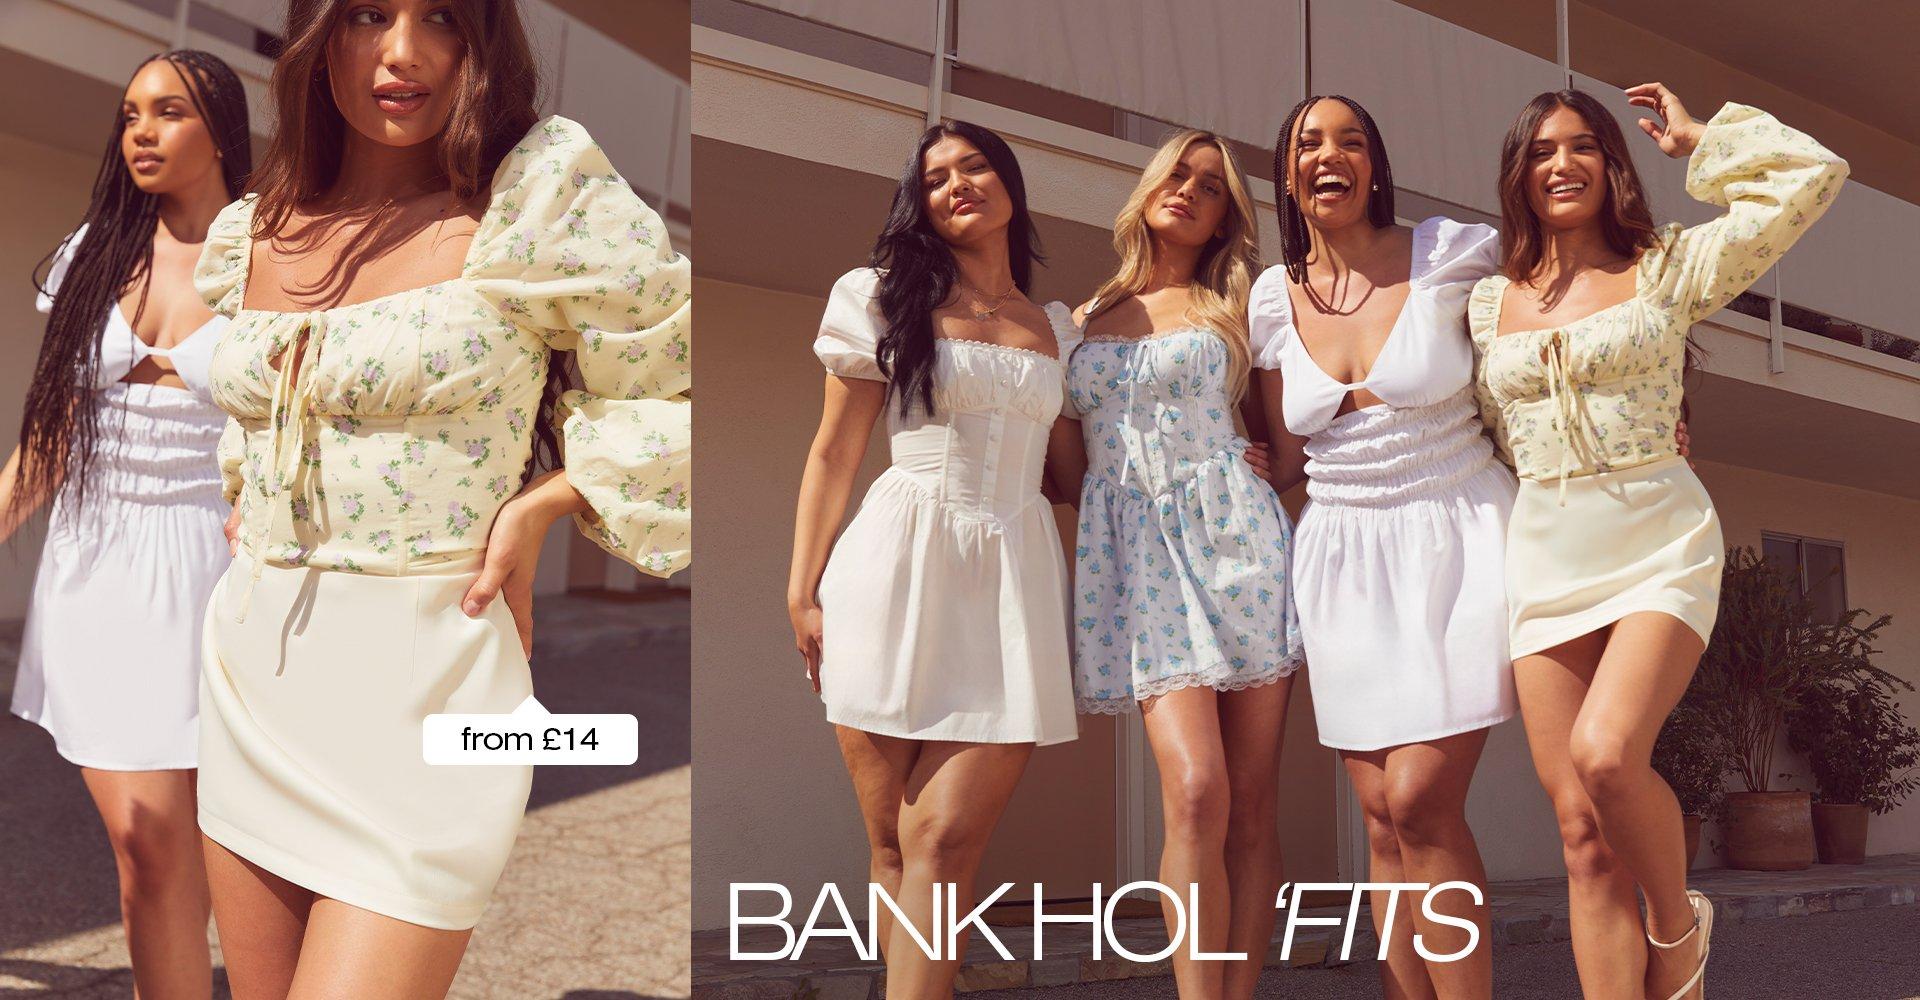 Bank Hol fits From £14